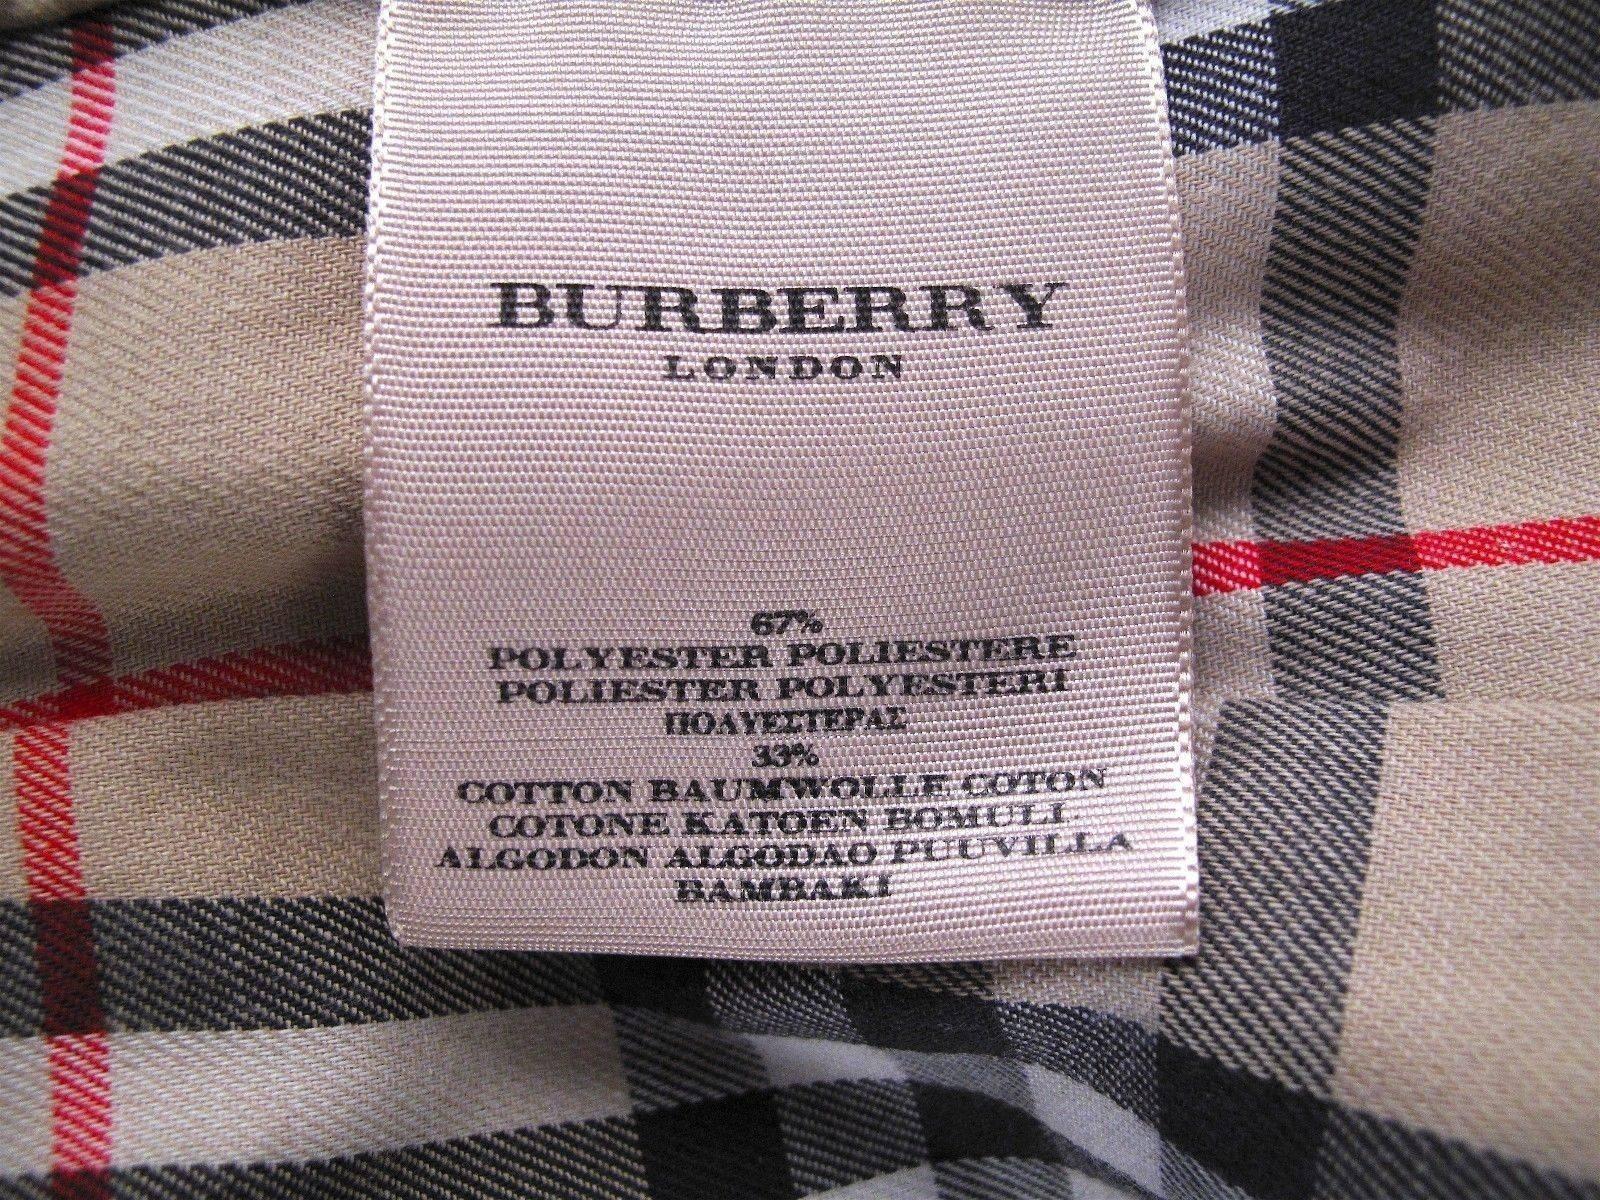 Burberry Trench Coat - 2 / 4 - 34 - 36 - Tan Belted Jacket Cotton London 2